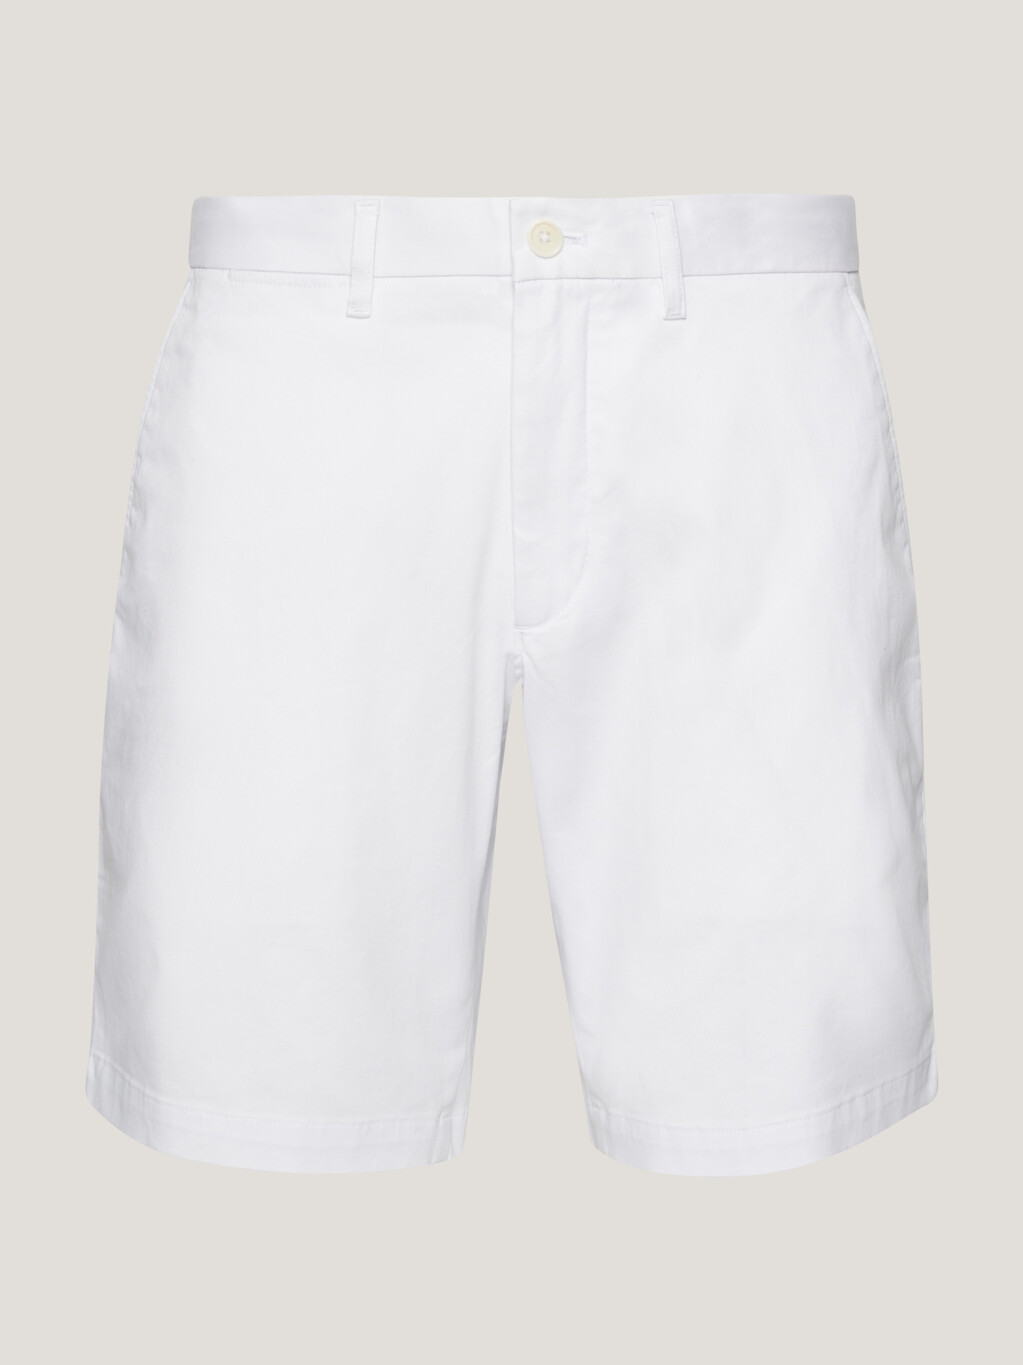 1985 Collection Brooklyn Twill Shorts, Th Optic White, hi-res